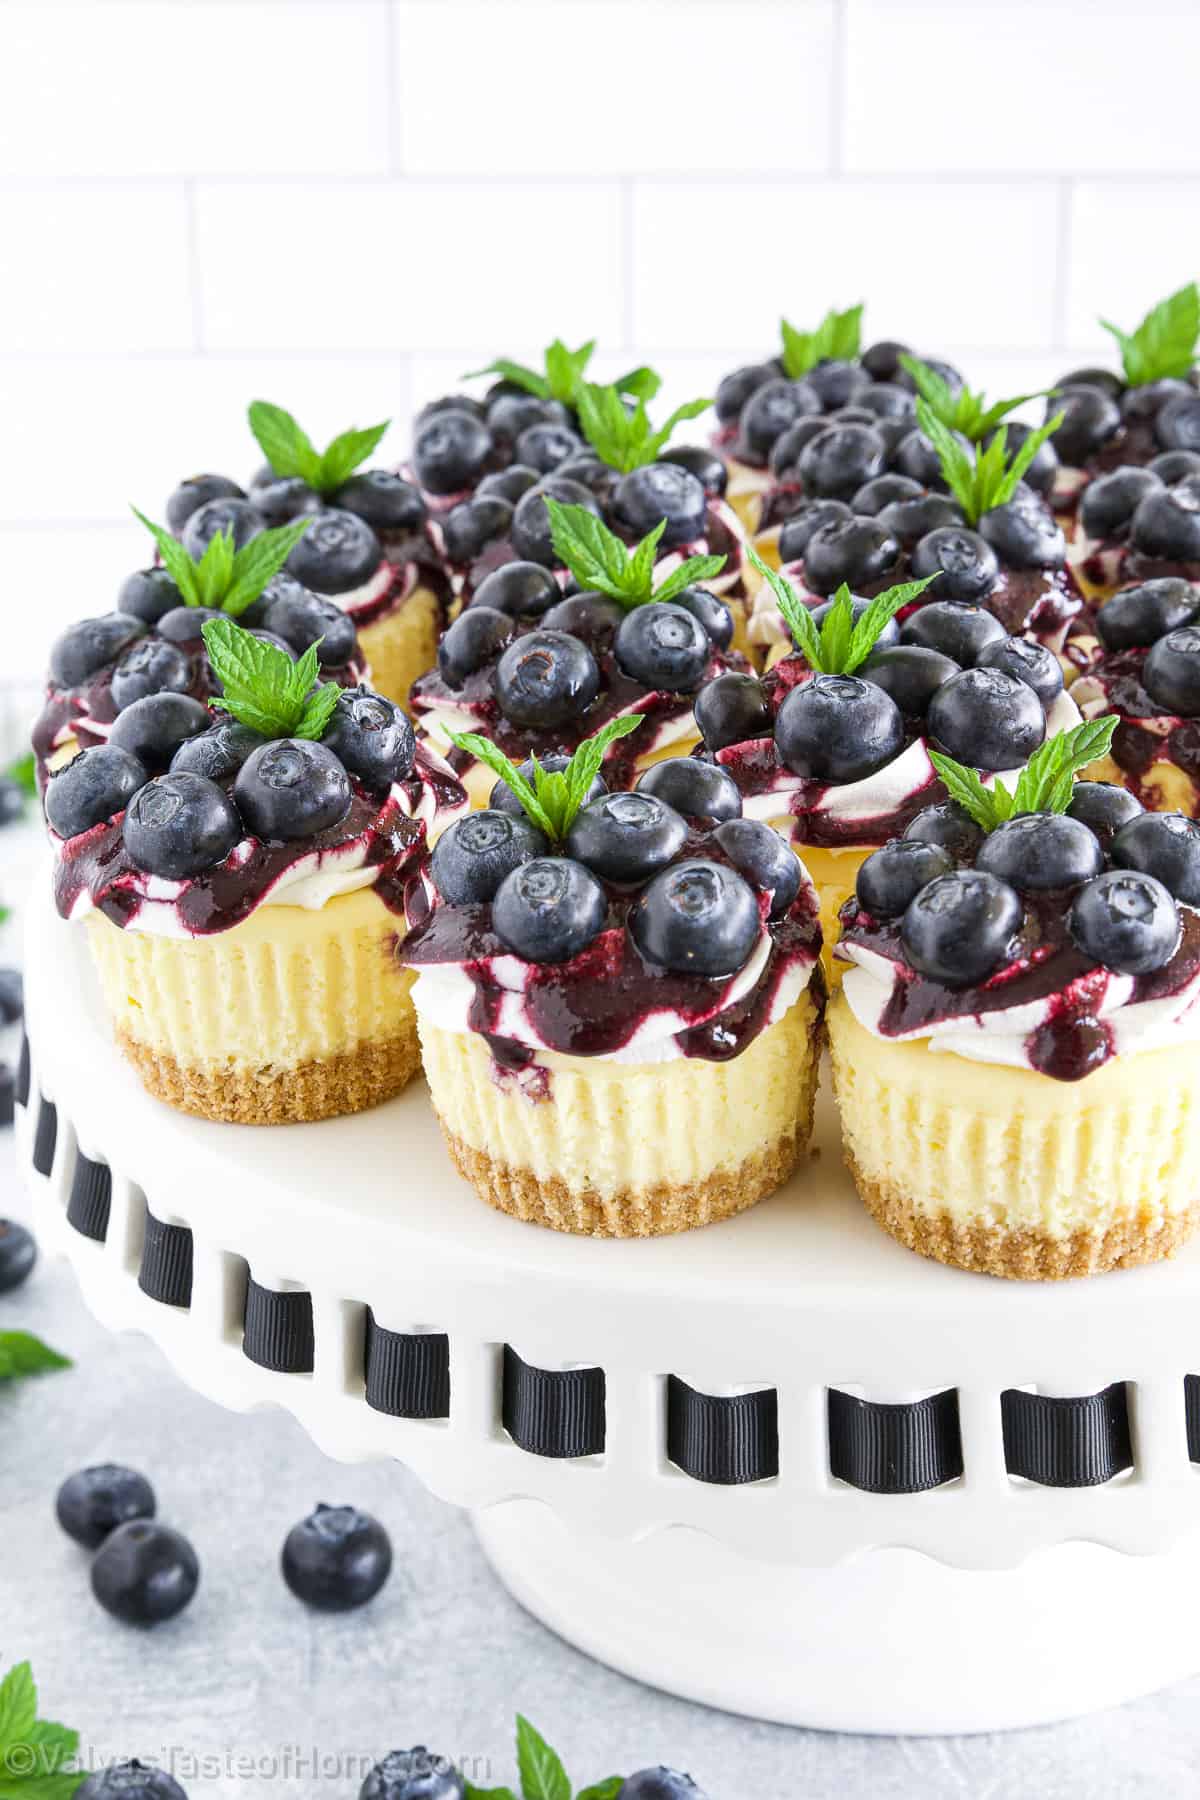 Blueberry cheesecake is a classic dessert that features a buttery graham cracker crust, rich and creamy cheesecake filling, and sweet and tangy blueberry topping. 